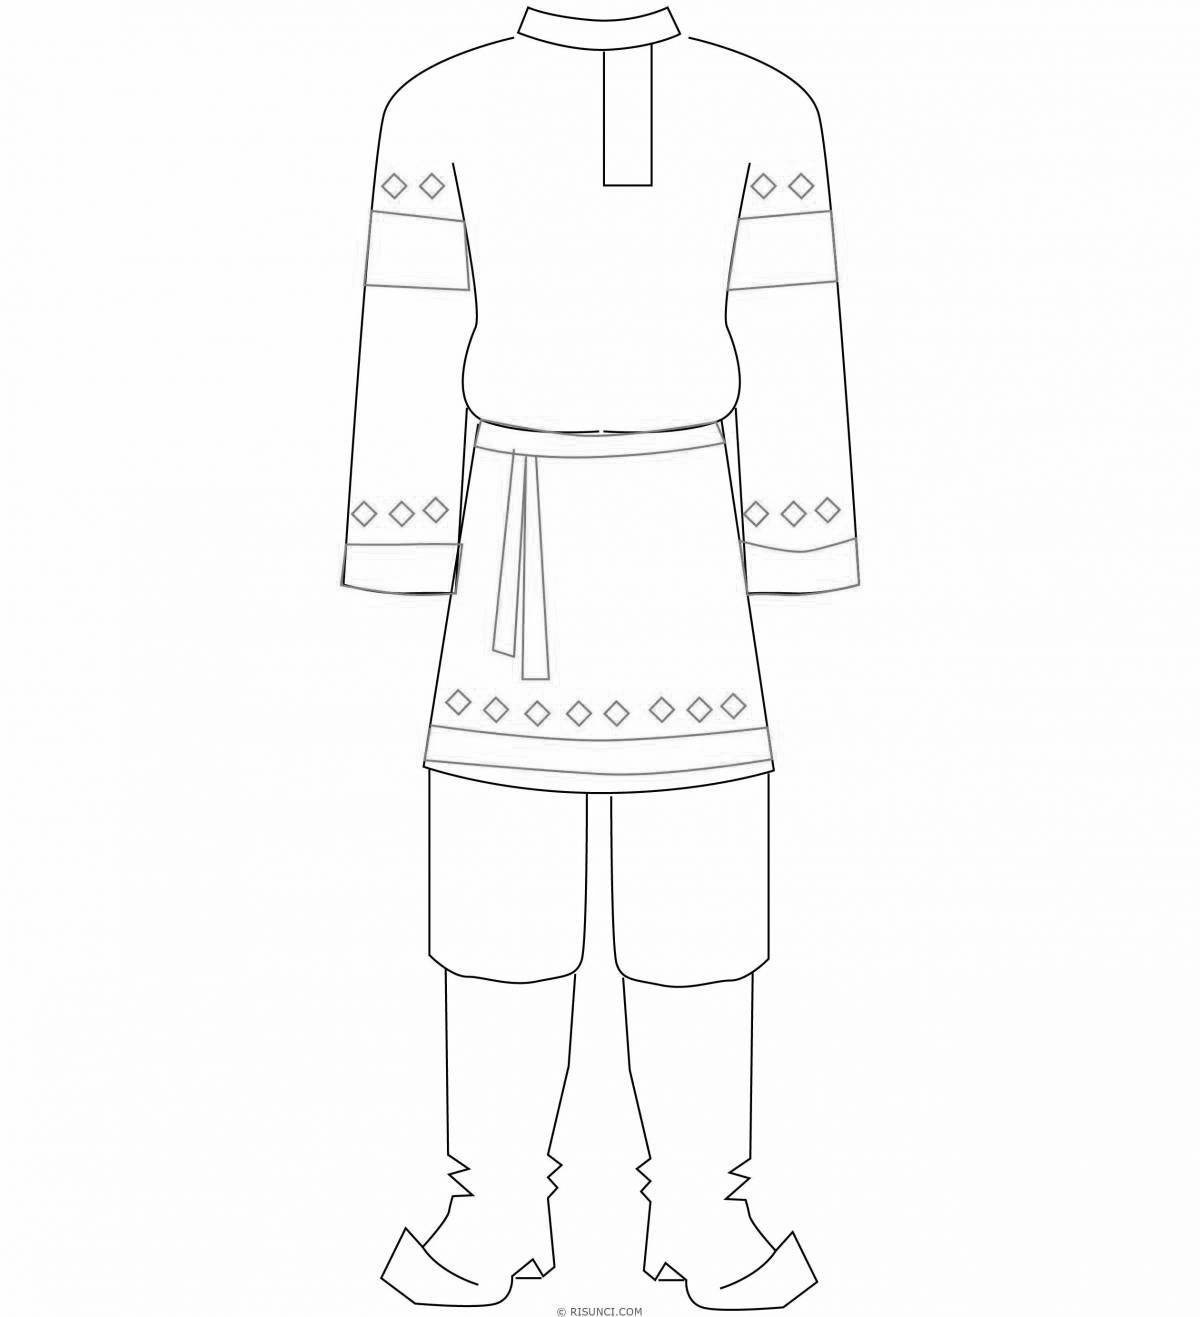 Coloring page of traditional Chuvash national costume